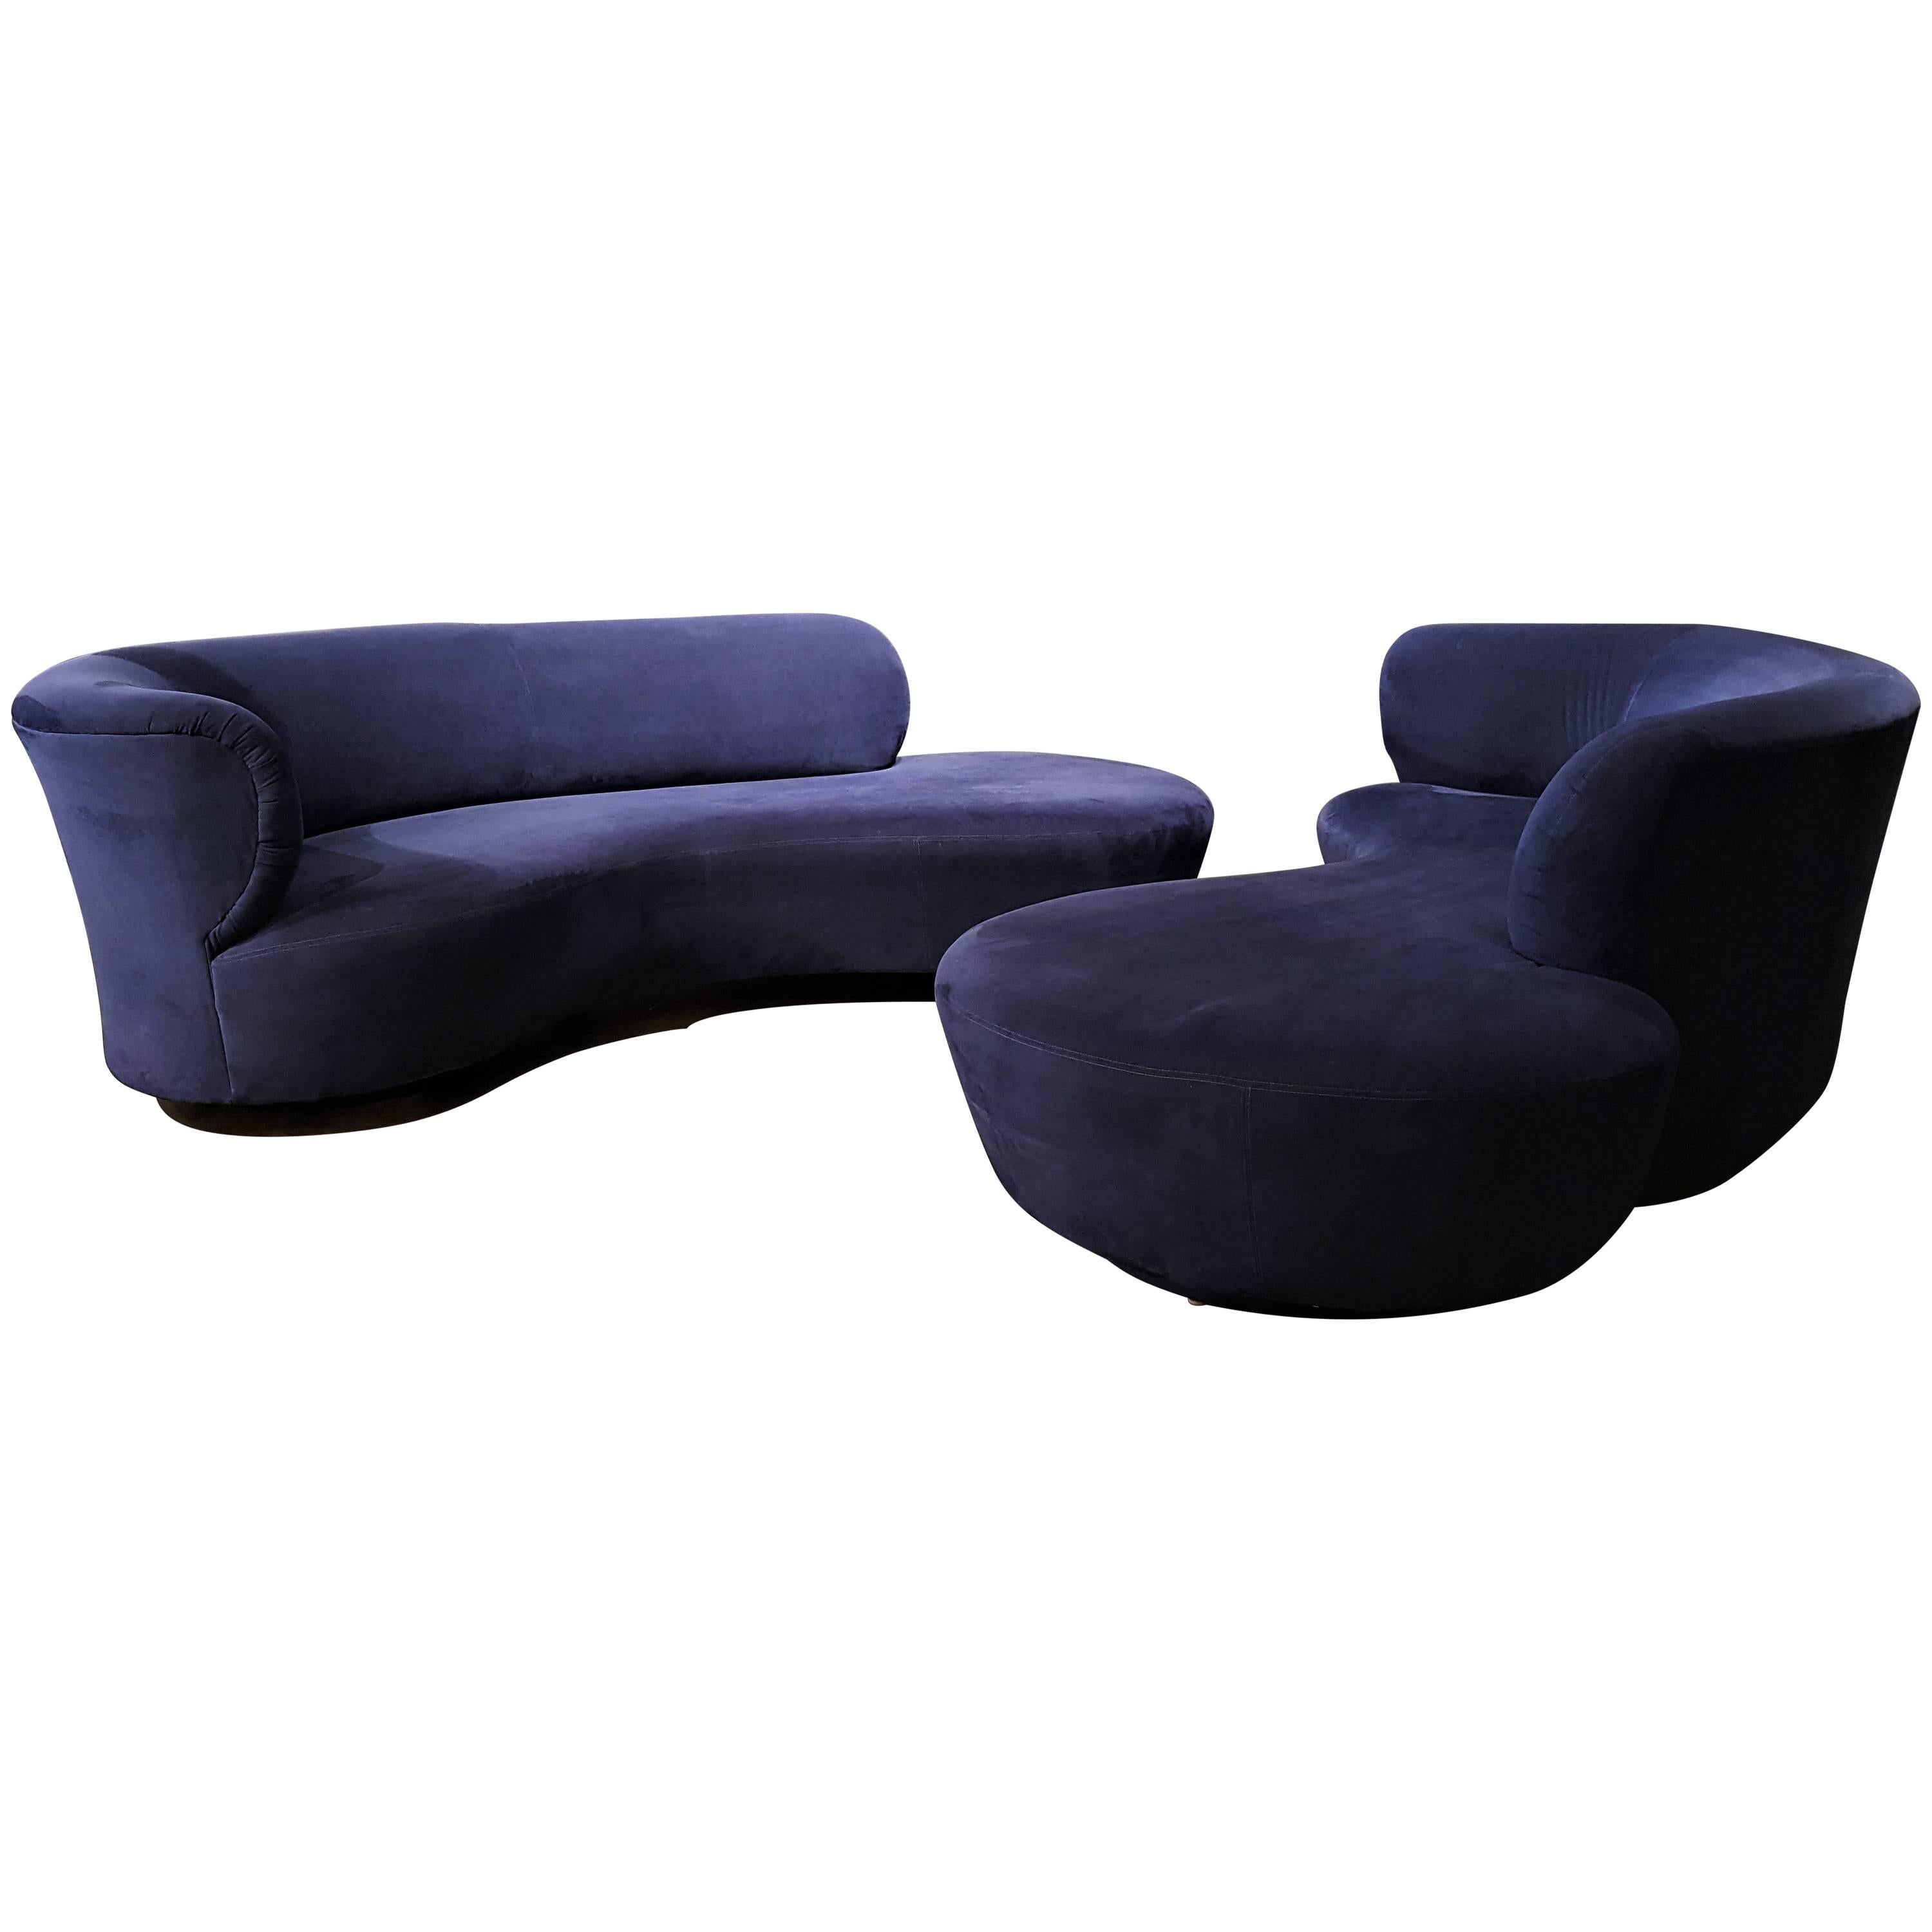 Iconic serpentine or cloud sofa Model 4891JL by Vladmir Kagan for Directional Furniture. This sofa was reupholstered several years ago in a gorgeous dark blue ultra suede which is in excellent condition. Extremely comfortable and ready to go!
If